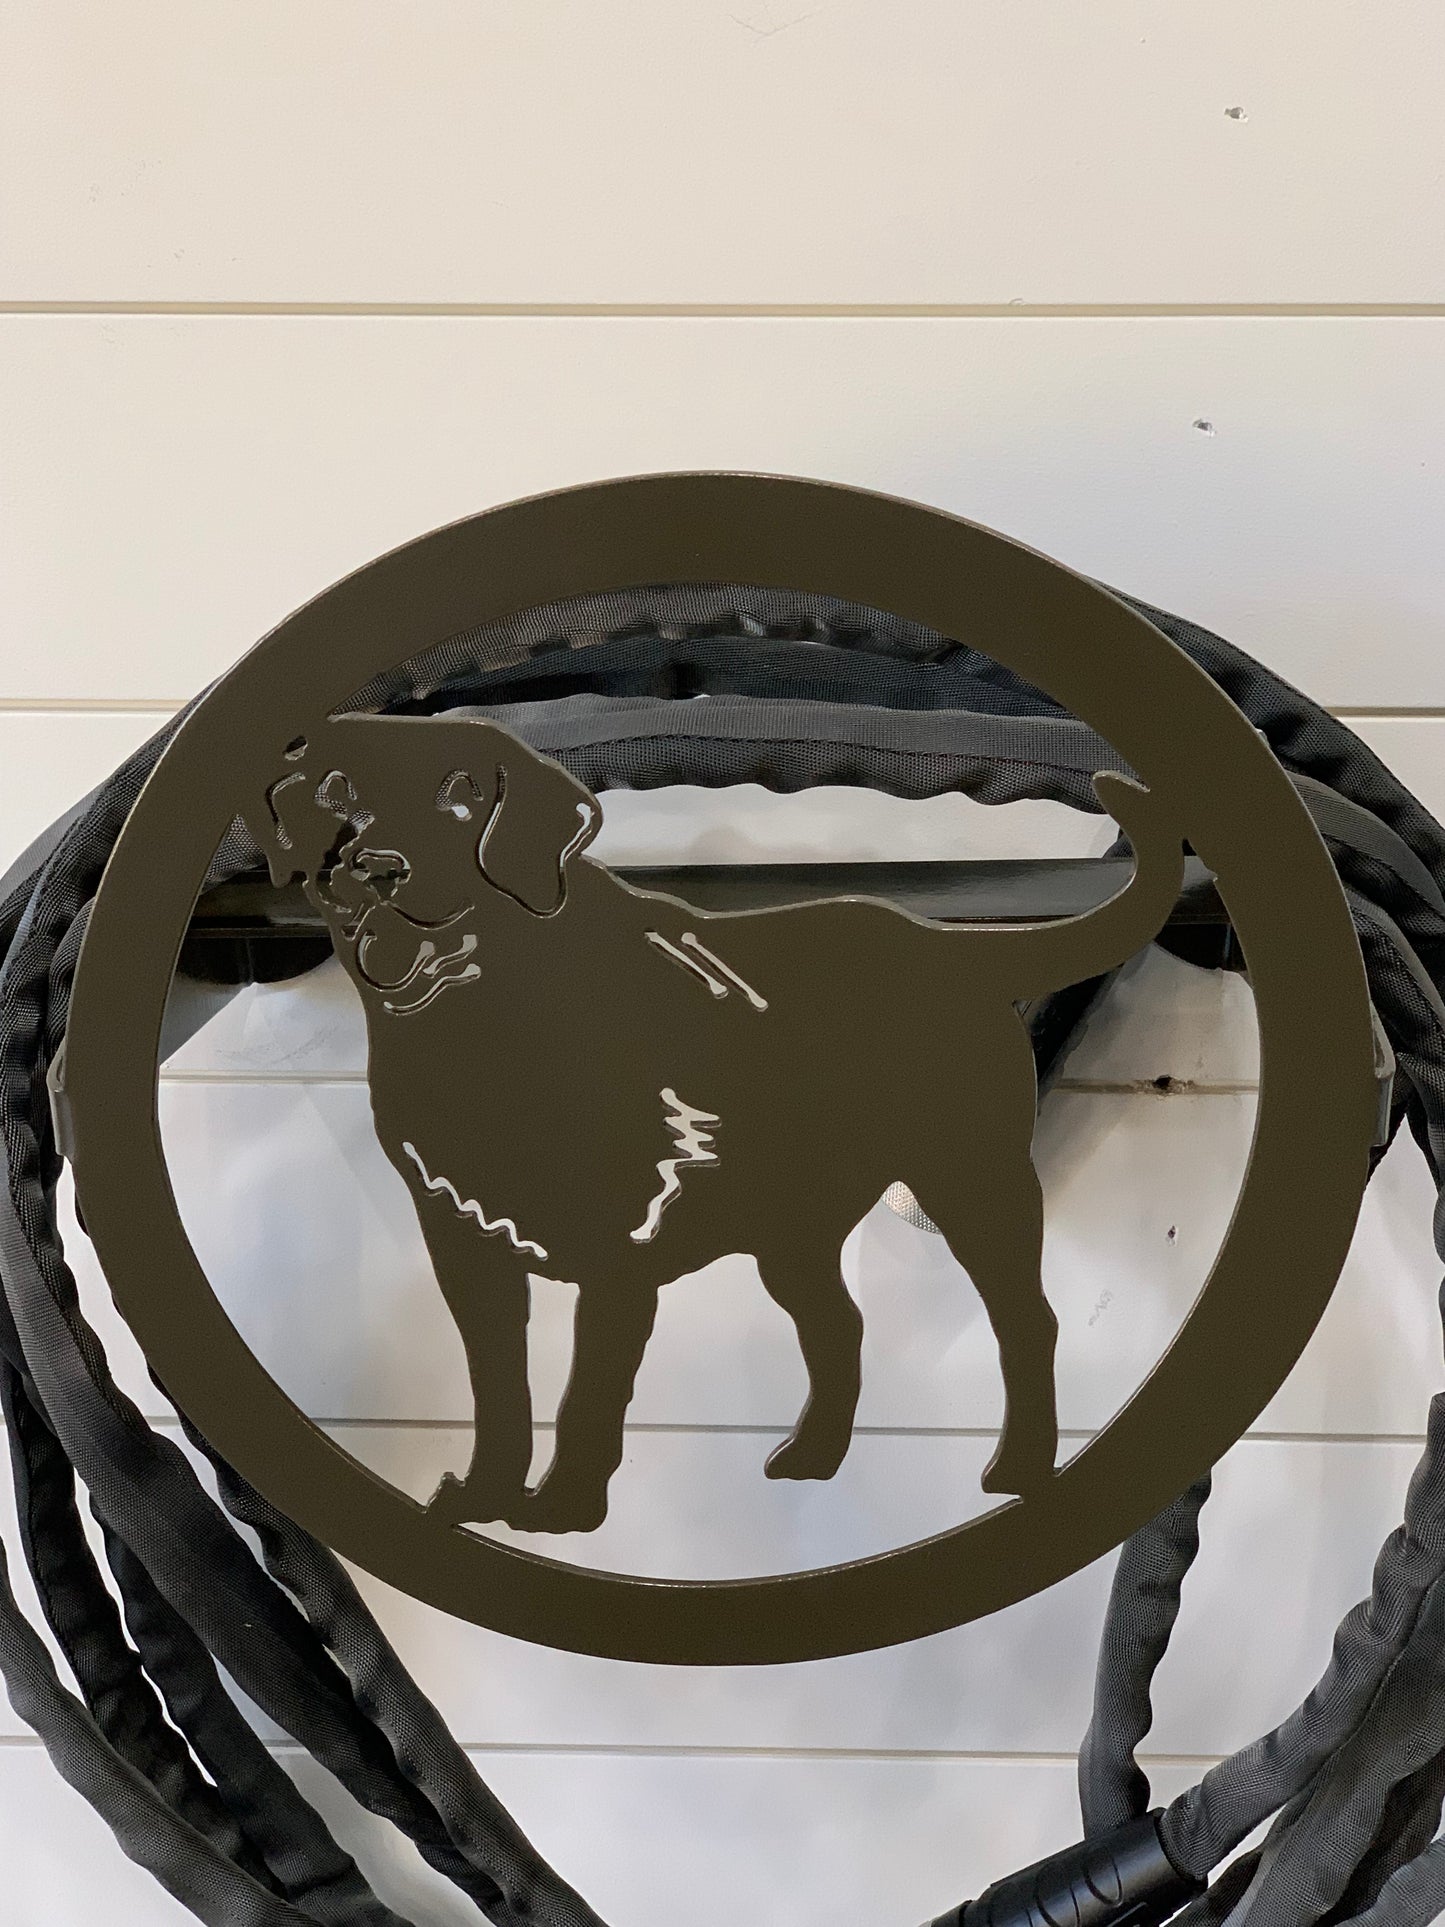 Water/Garden Hose Holder/Hanger with Lab- Your color choice -Two mounting options